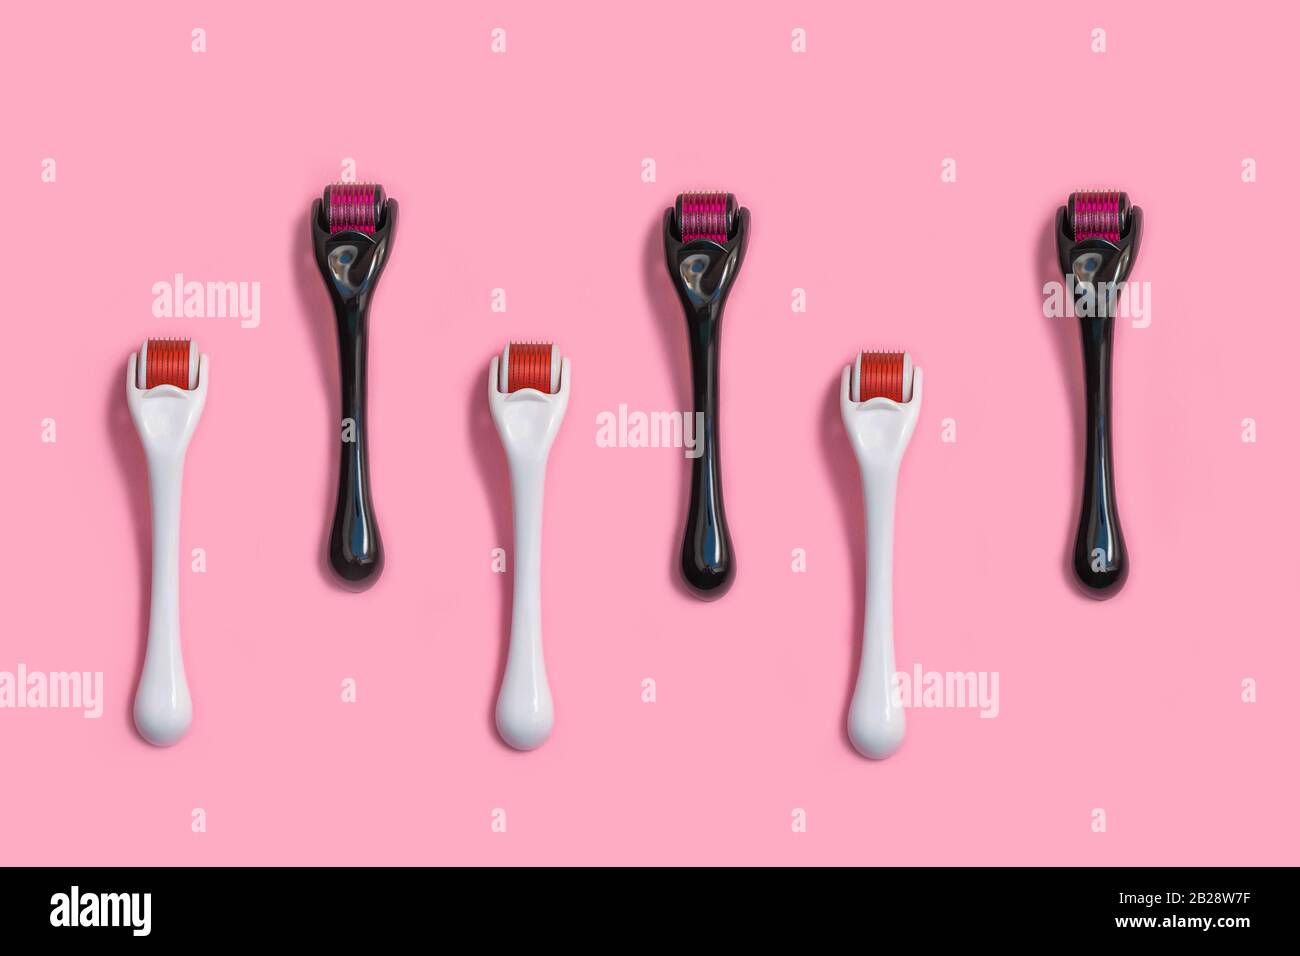 Micro needle derma roller for home face care on light pink background. Top view, flat lay, pattern Stock Photo